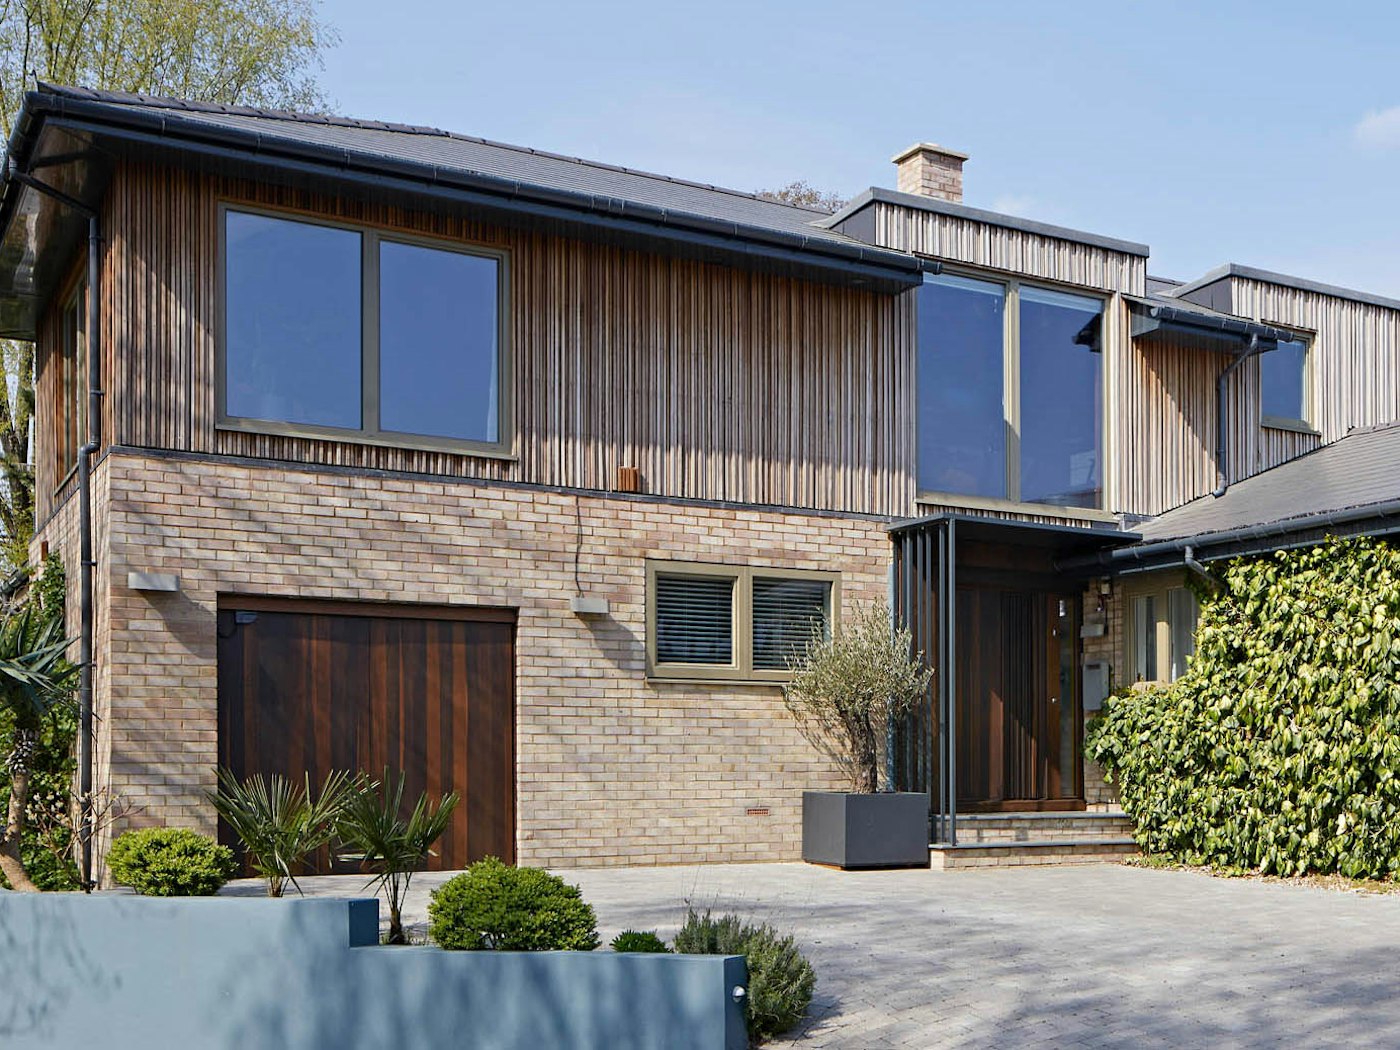 Complementing the "Bari" on this house is a "Raw" bifold garage door in the same fumed oak wood. Working together flawlessly with the exterior cladding & brickwork